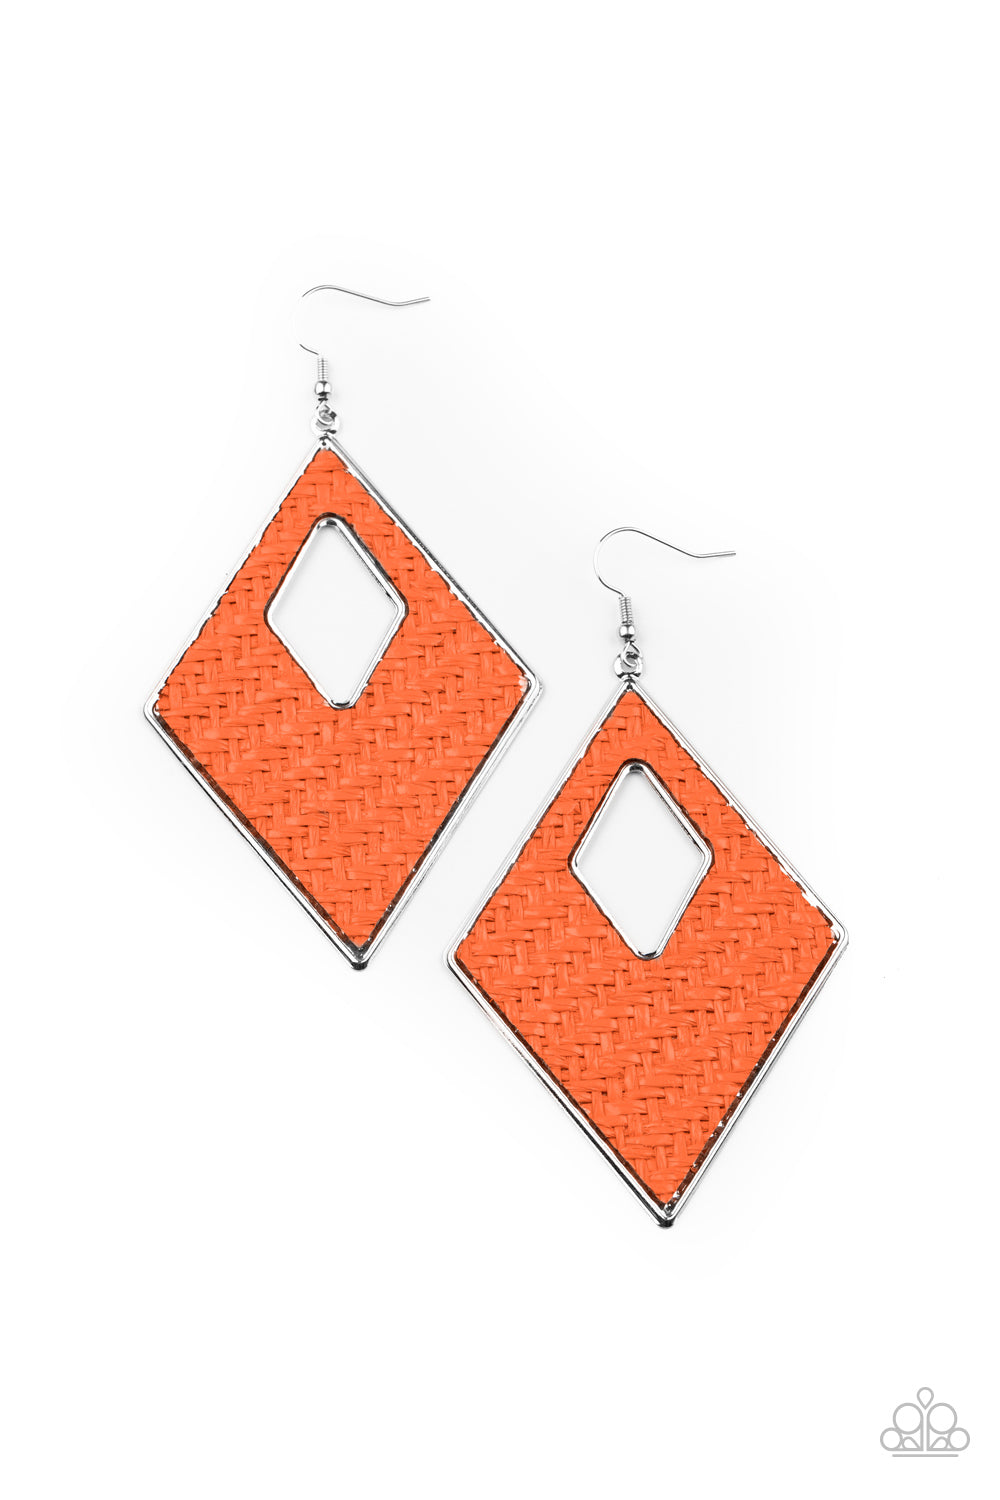 &lt;P&gt;Featuring a wicker-like pattern, shiny Amberglow thread weaves across the front of a silver diamond-shape frame for a trendsetting look. Earring attaches to a standard fishhook fitting.&lt;/P&gt;  

&lt;P&gt; &lt;I&gt;  Sold as one pair of earrings. &lt;/I&gt;  &lt;/P&gt;


&lt;img src=\&quot;https://d9b54x484lq62.cloudfront.net/paparazzi/shopping/images/517_tag150x115_1.png\&quot; alt=\&quot;New Kit\&quot; align=\&quot;middle\&quot; height=\&quot;50\&quot; width=\&quot;50\&quot;/&gt;